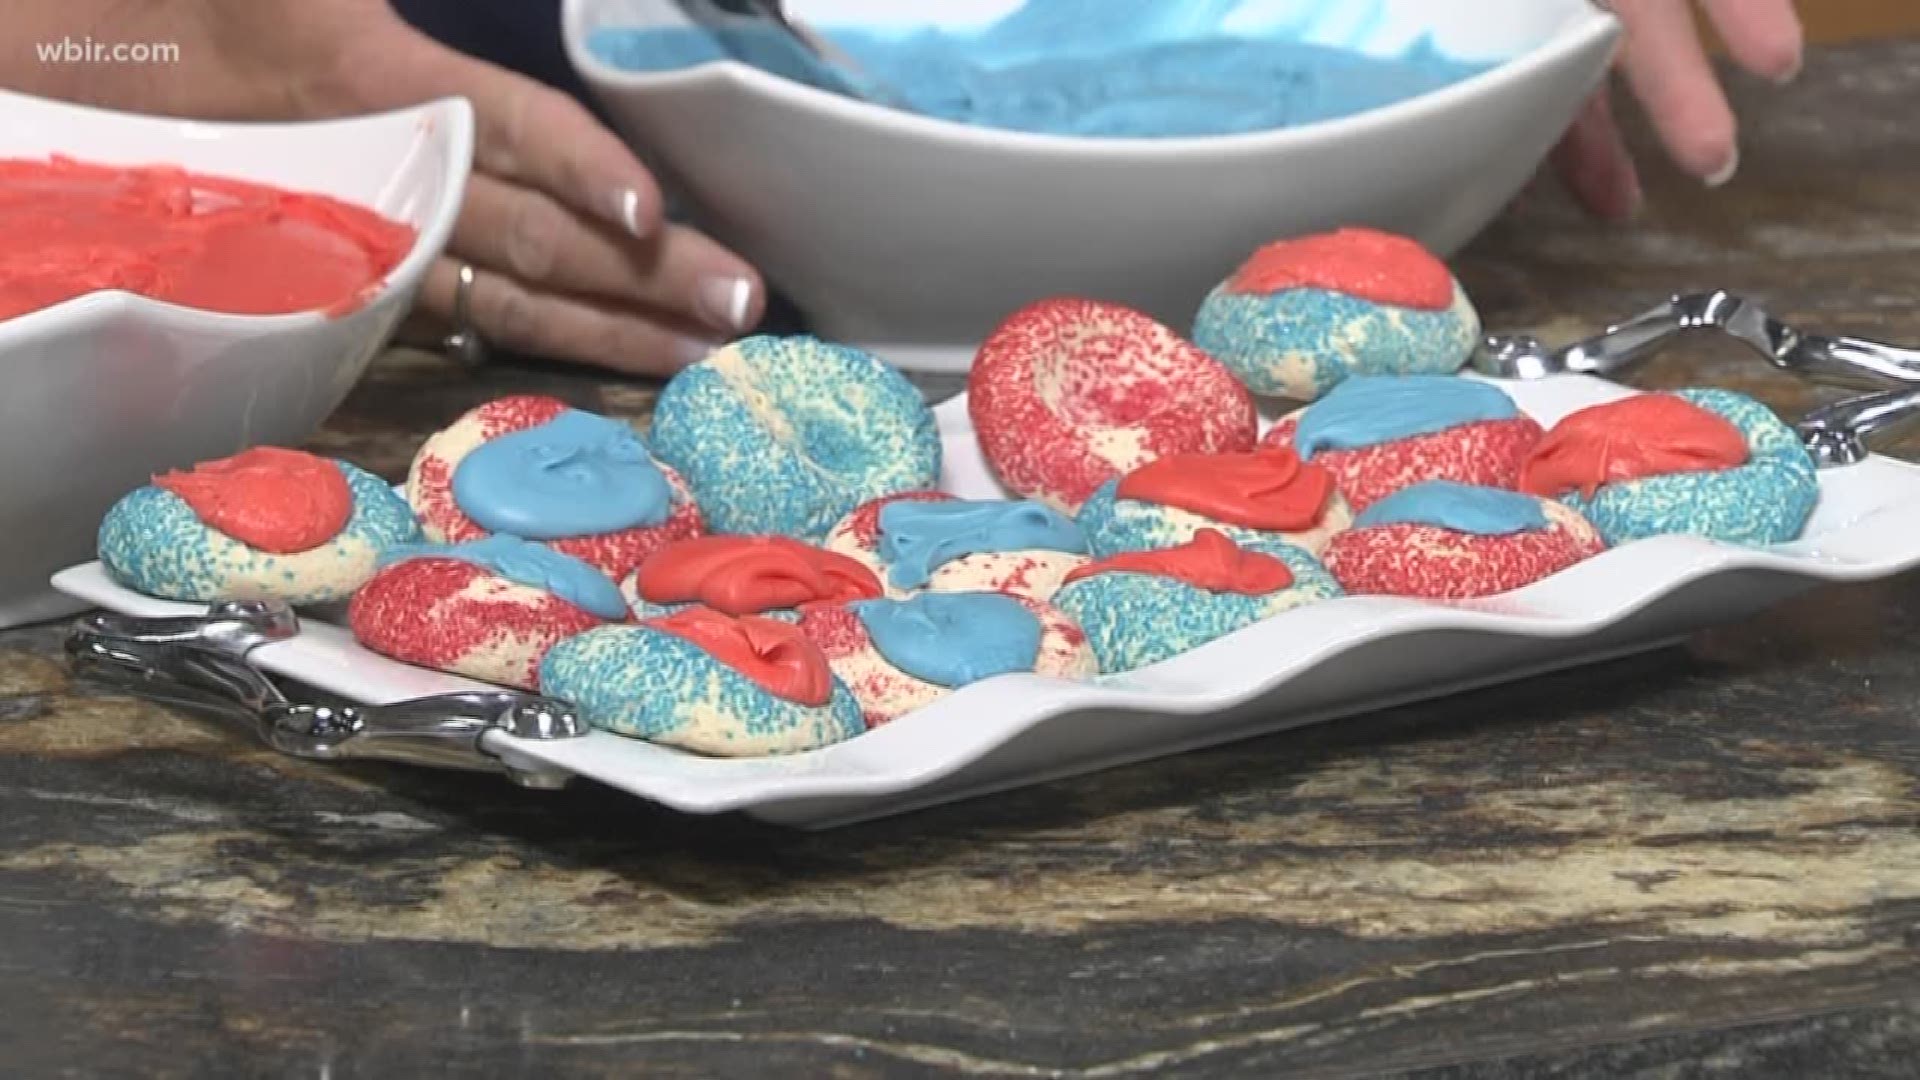 Betty Henry with B&G Catering serves up a great idea for a Fourth of July party treat!